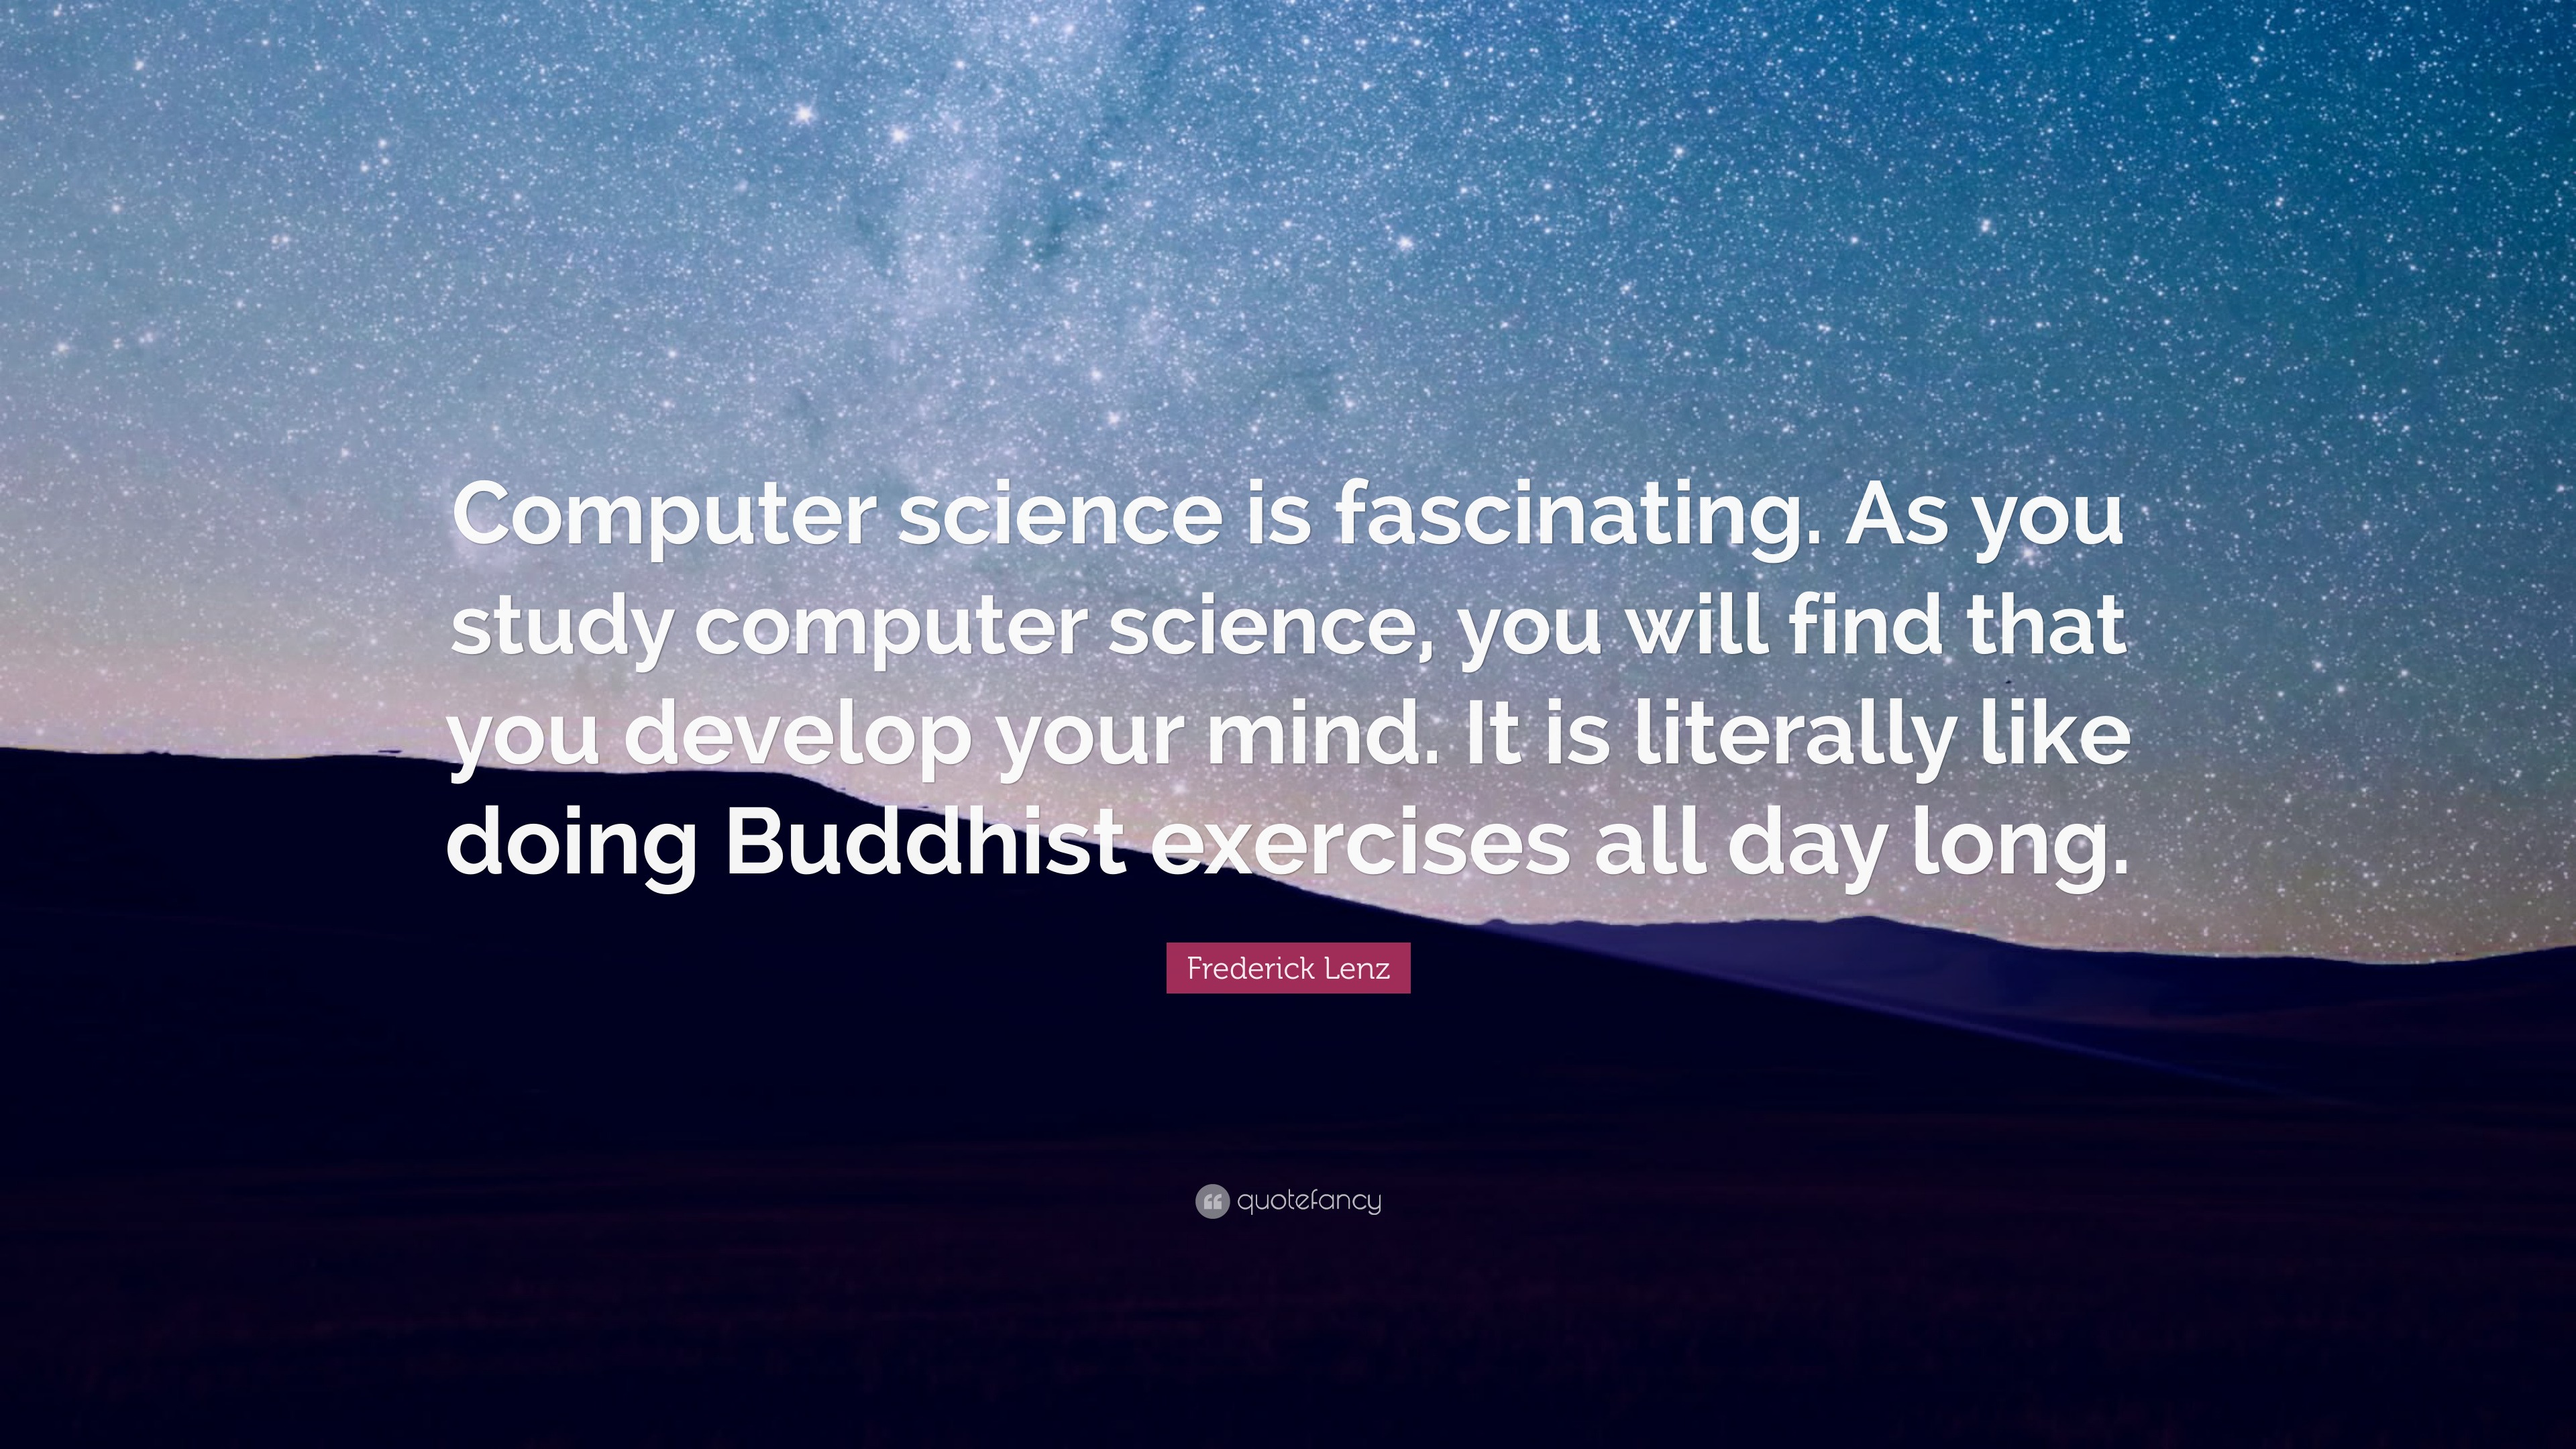 Frederick Lenz Quote: “Computer science is fascinating. As you study